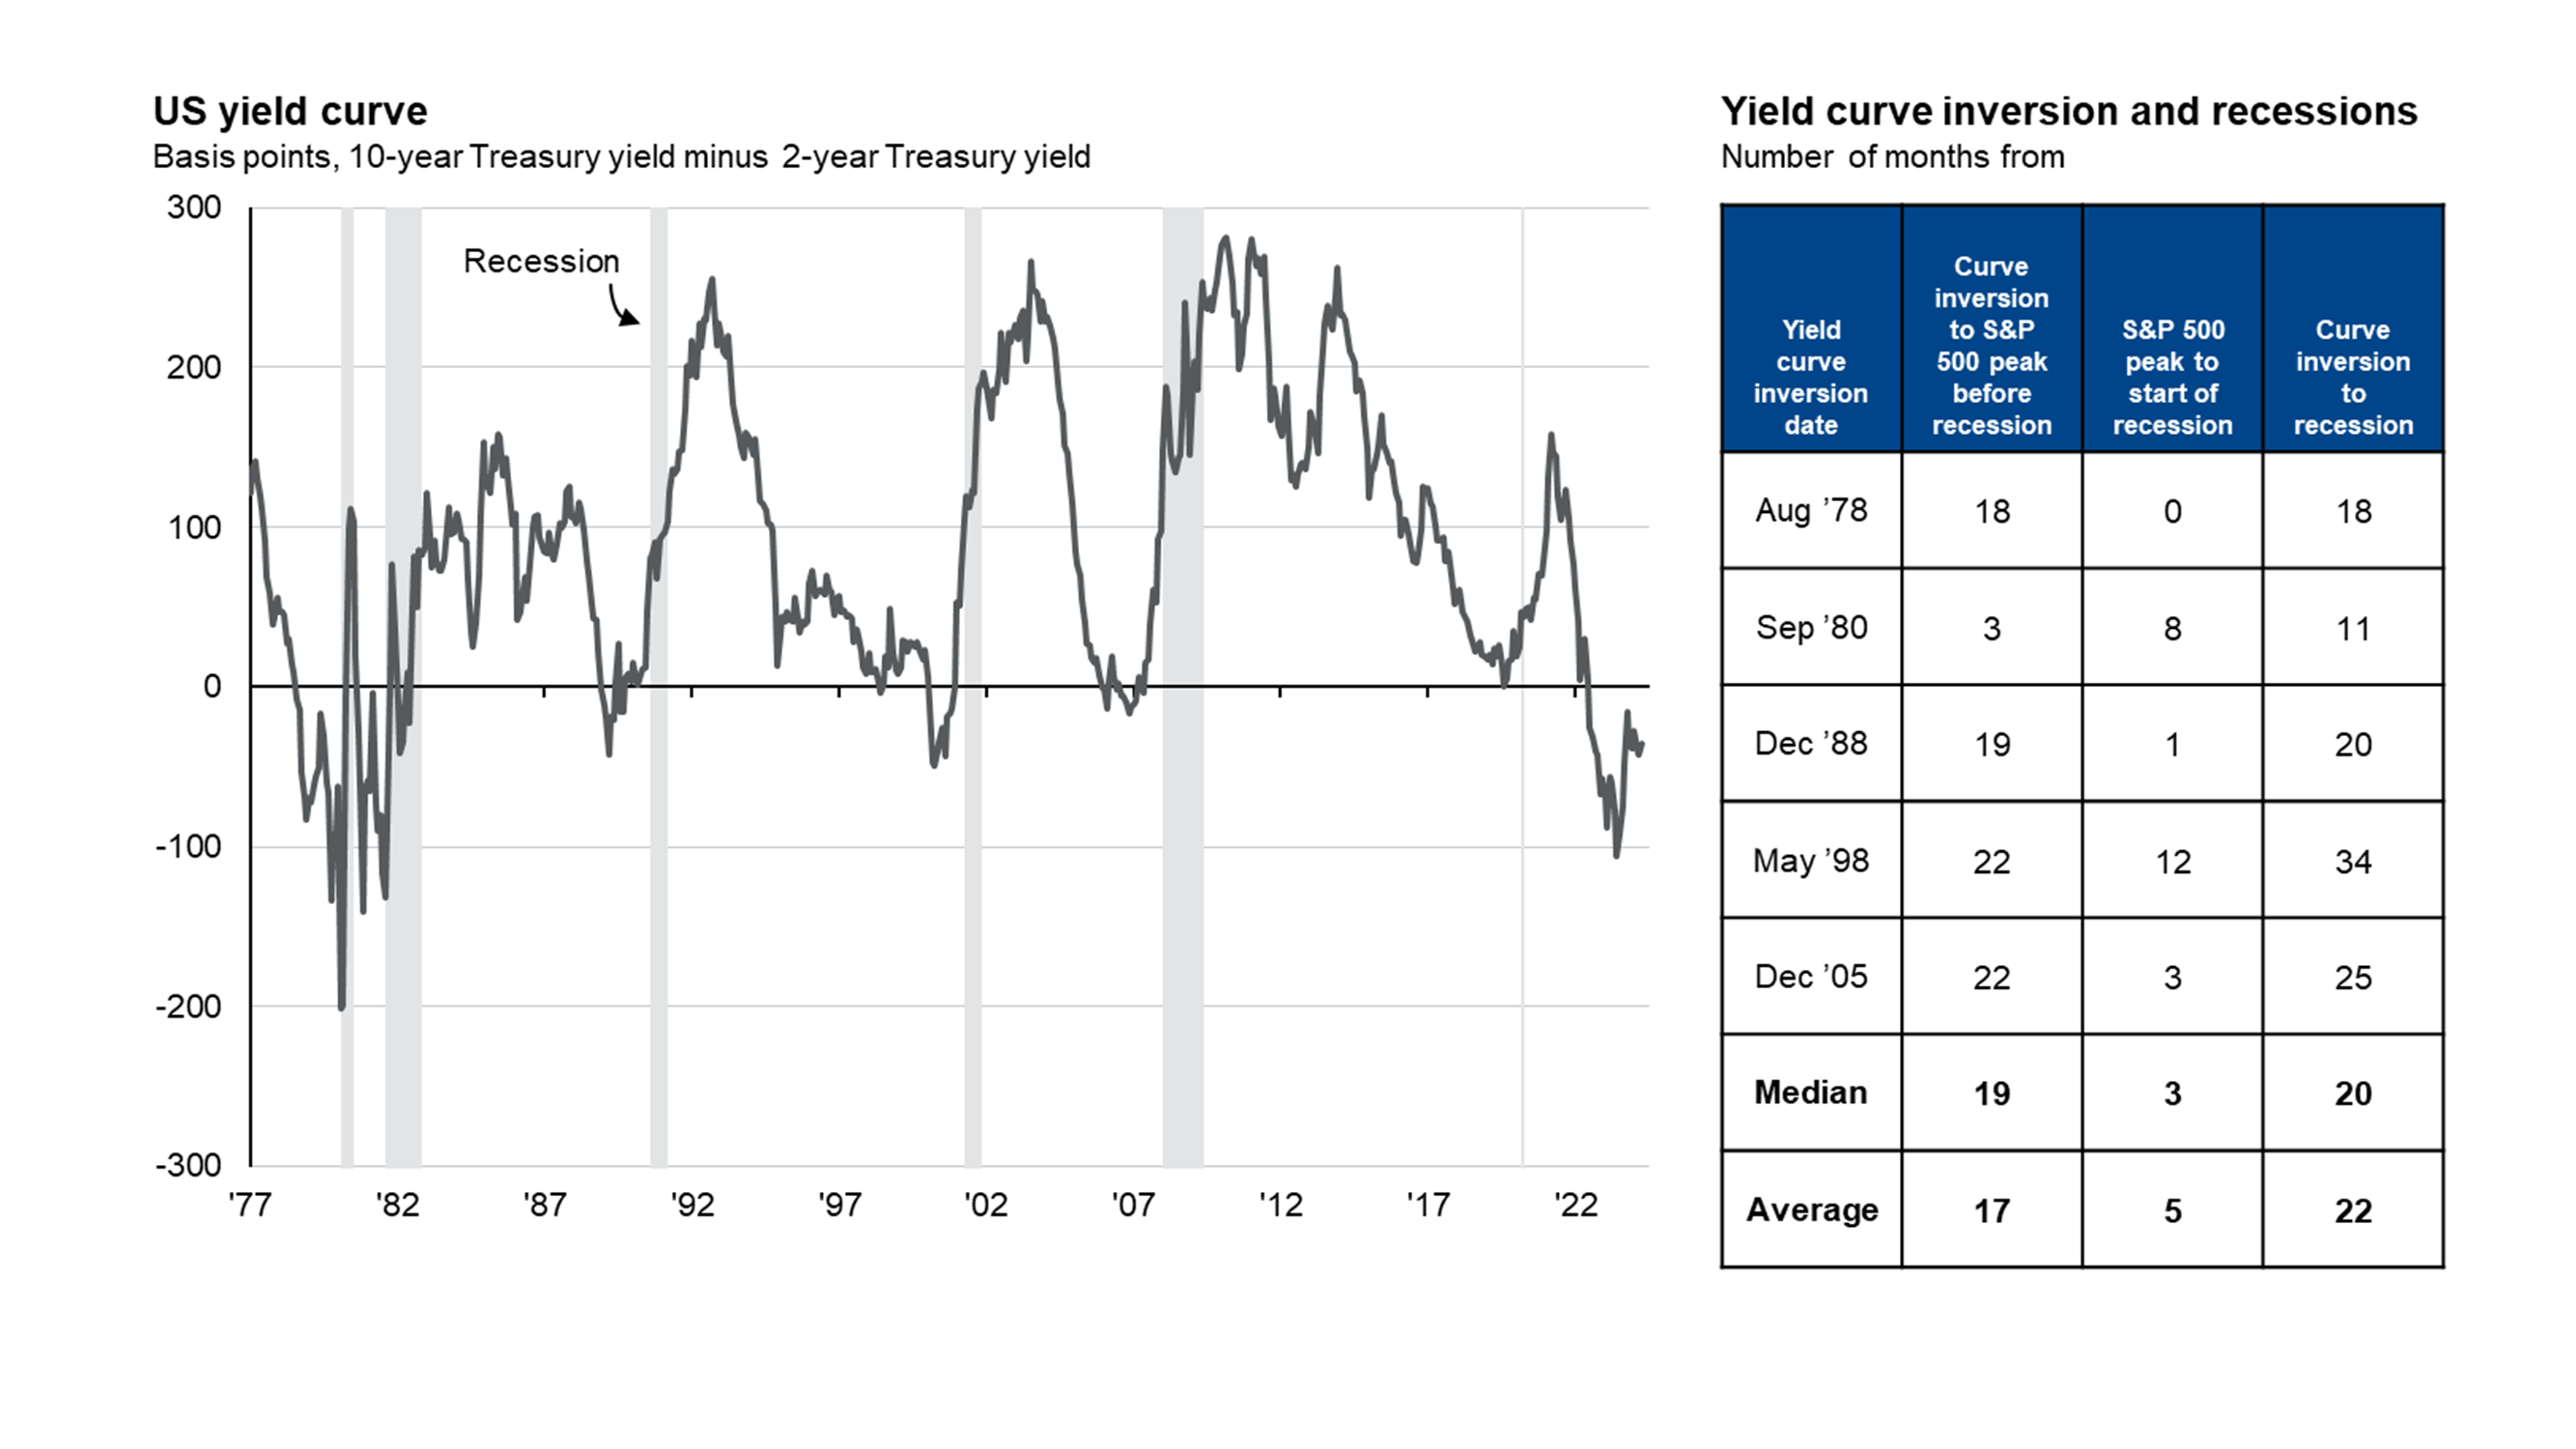 Global government bond yields